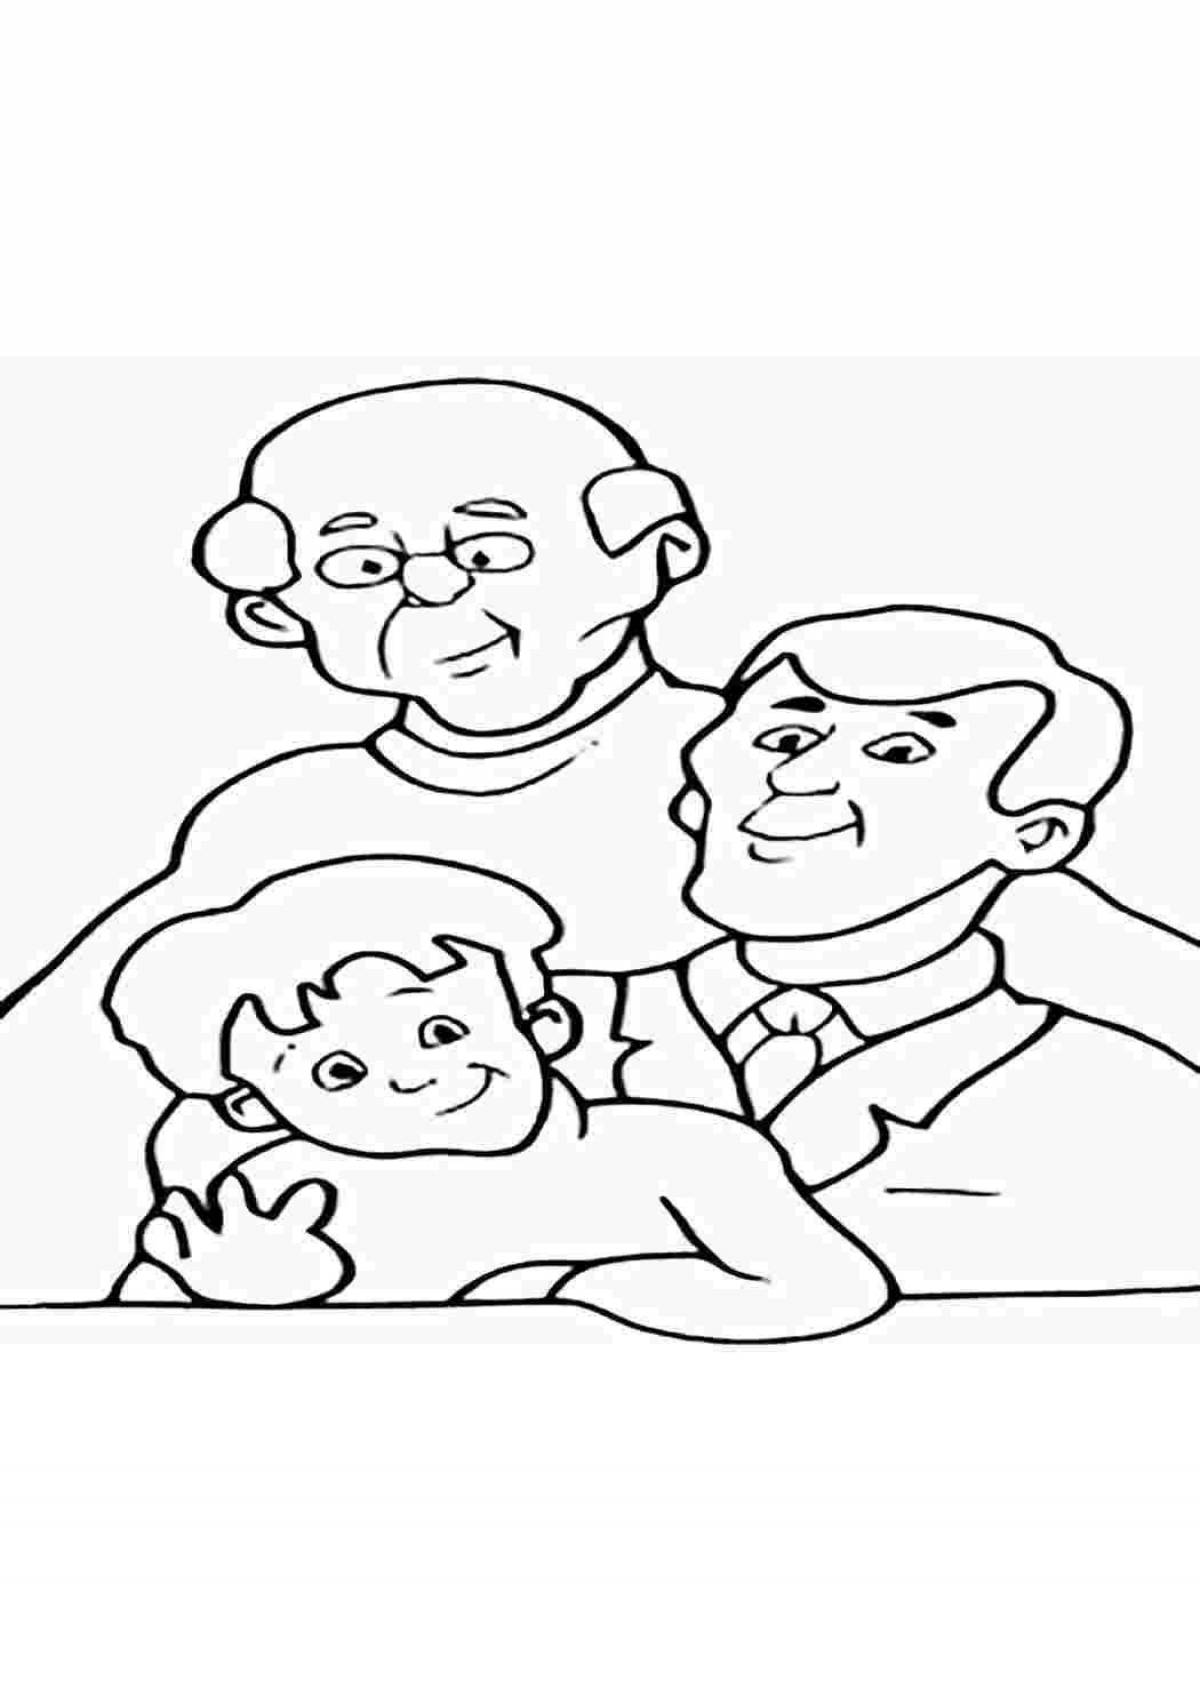 Amazing son and dad coloring book